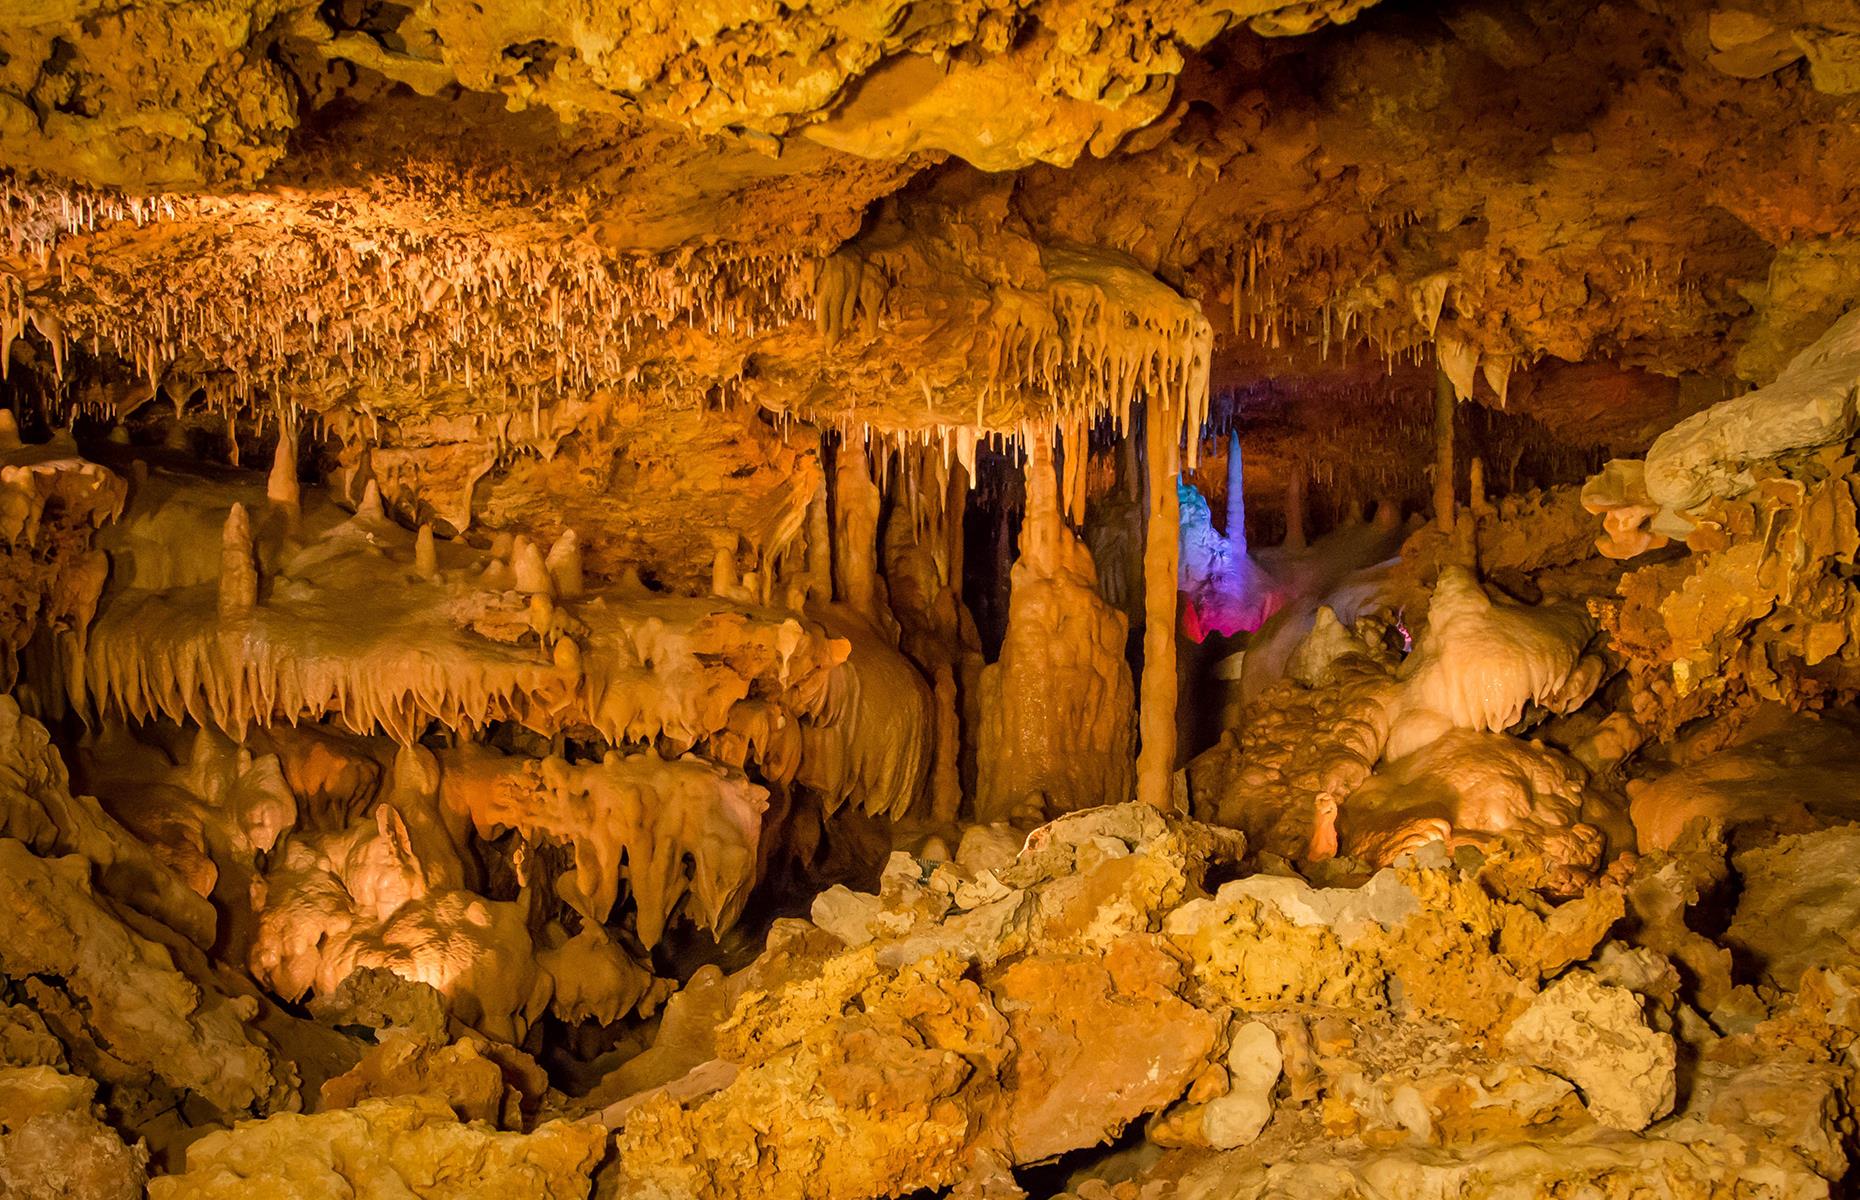 <p>In 1963, the Texas Highway Department were drilling through rock to test if it could support an overpass in Georgetown, just north of Austin. When their drill bit dropped suddenly, they realized they'd stumbled across a vast subterranean network of karst caves. Now known as the <a href="https://innerspacecavern.com/">Inner Space Cavern</a>, the chambers are open to visitors, who are wowed by the sharp stalagmites, still pools and even coral (this was once the ocean floor).</p>  <p><strong><a href="https://www.loveexploring.com/gallerylist/68414/americas-underground-attractions-you-didnt-know-existed">Discover more of America's underground attractions you didn't know existed</a></strong></p>